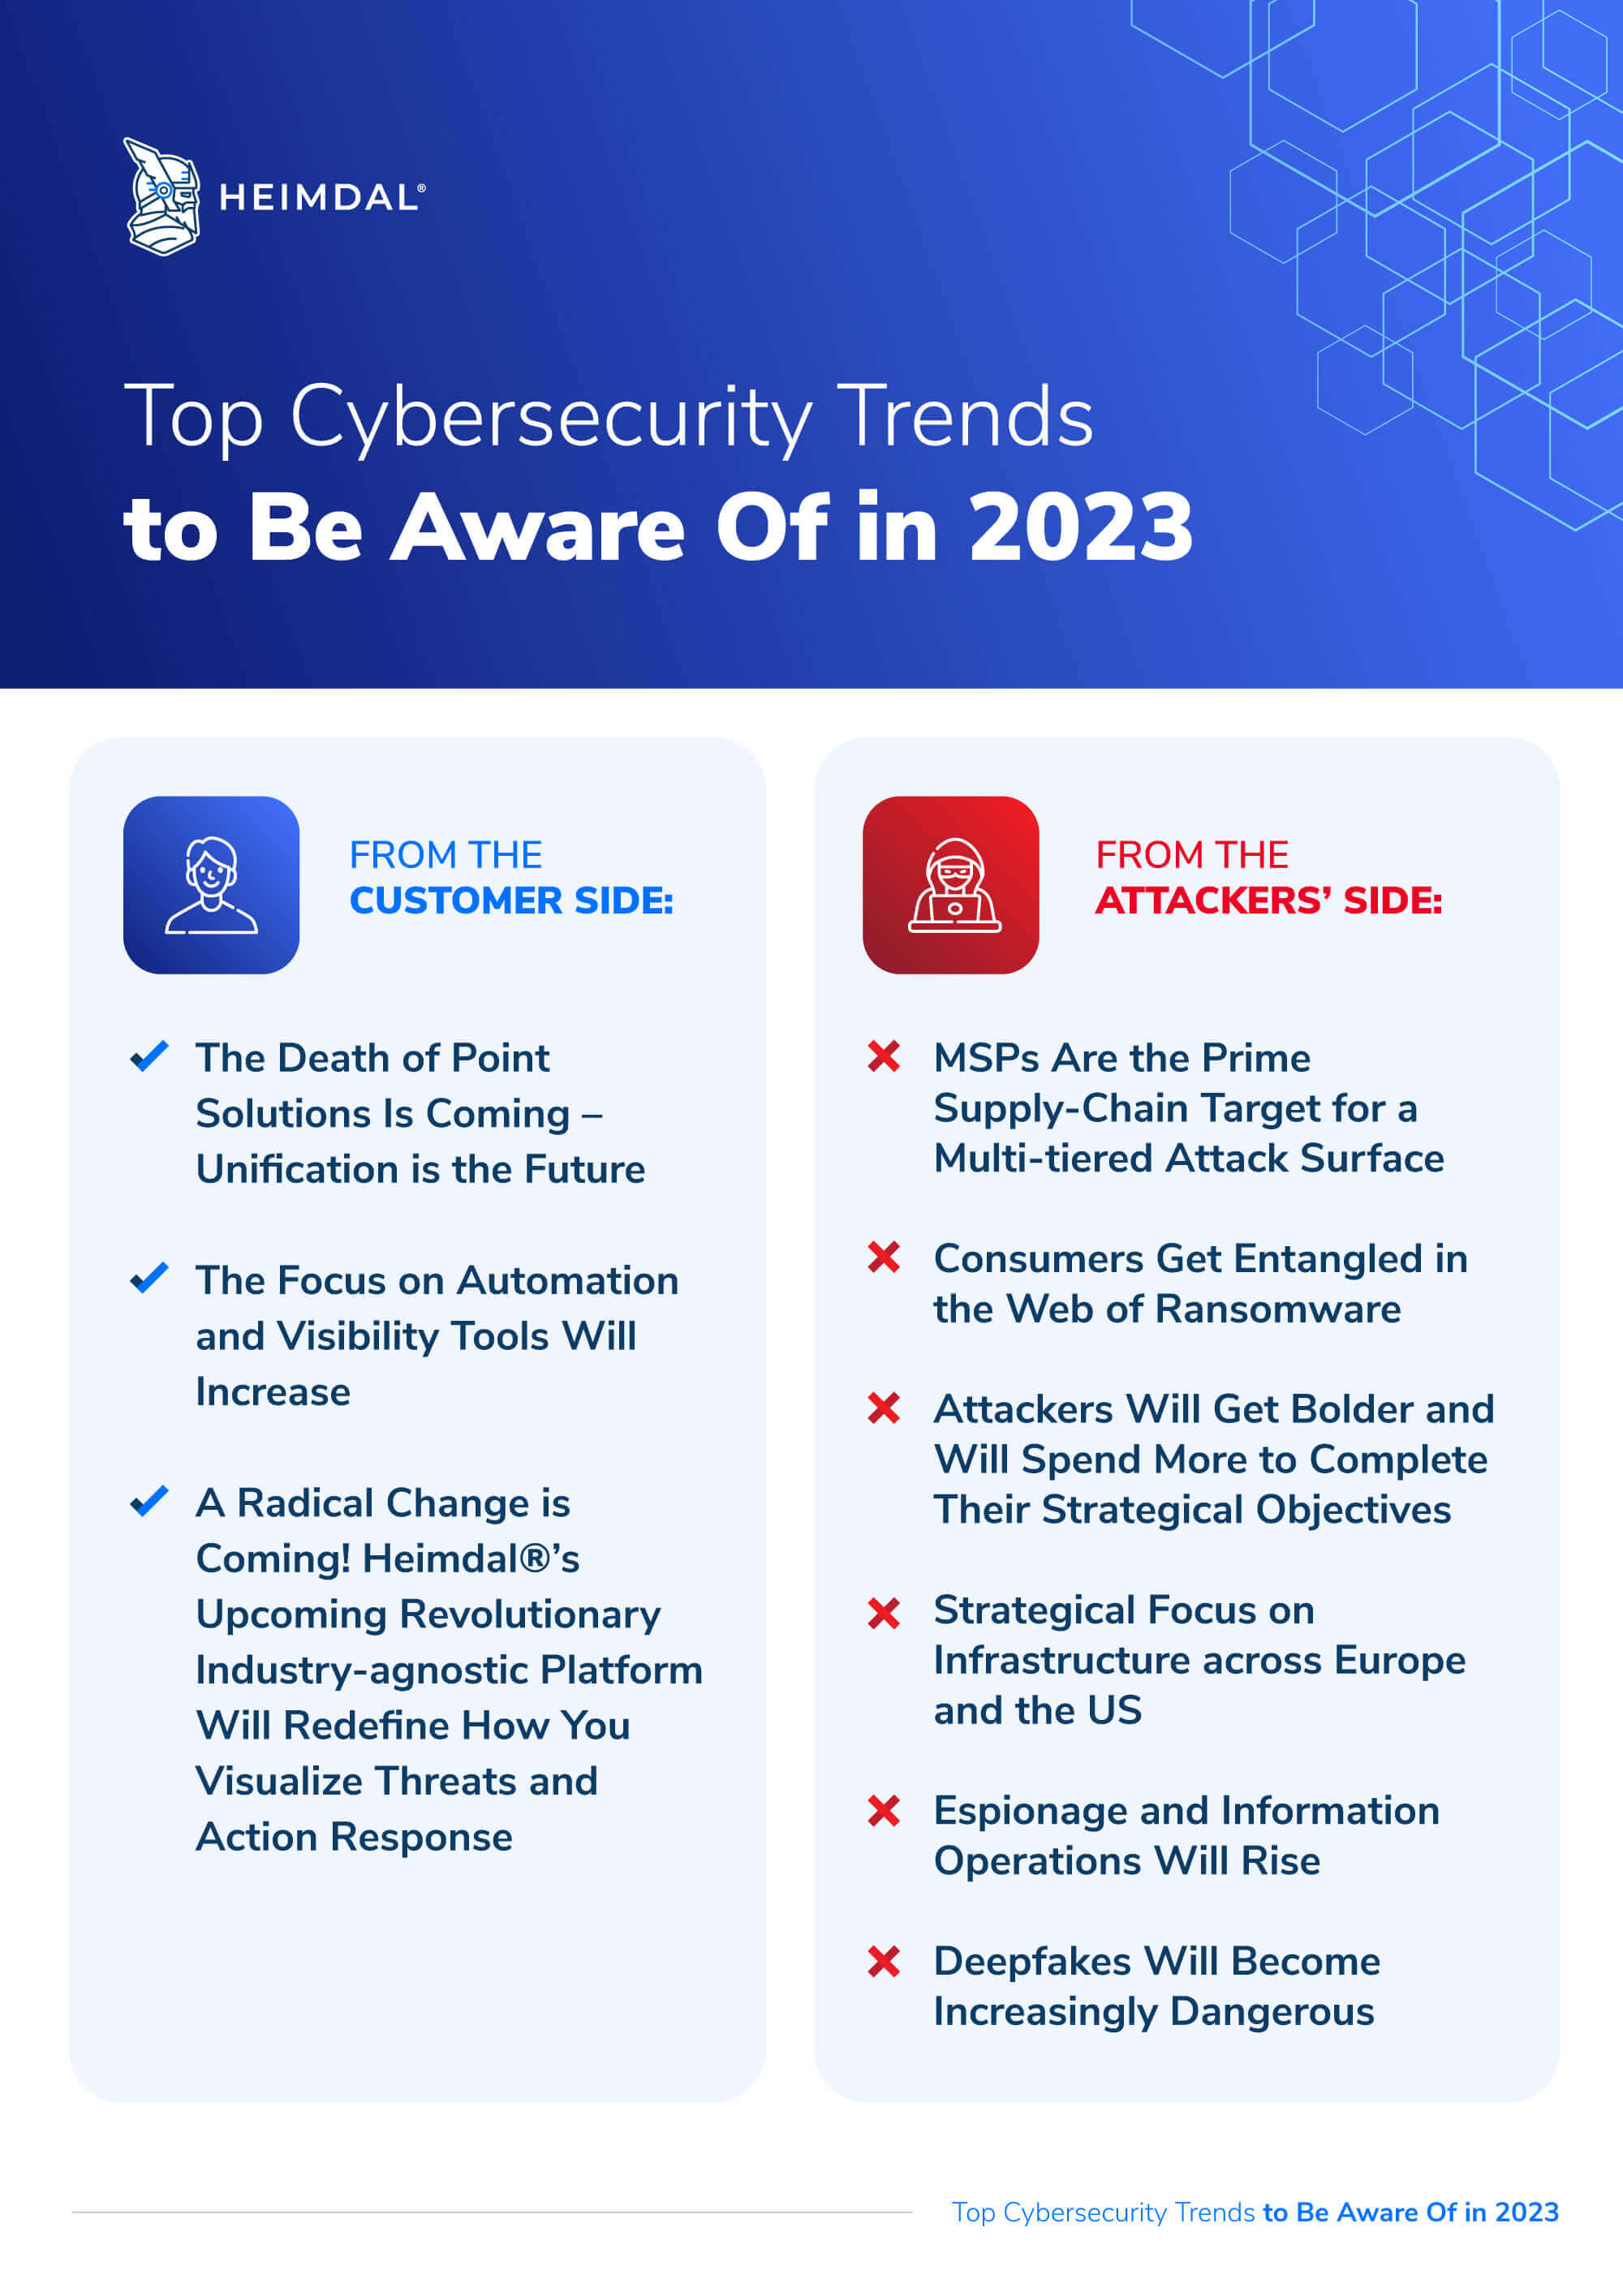 Top Cybersecurity Trends to Be Aware Of in 2023